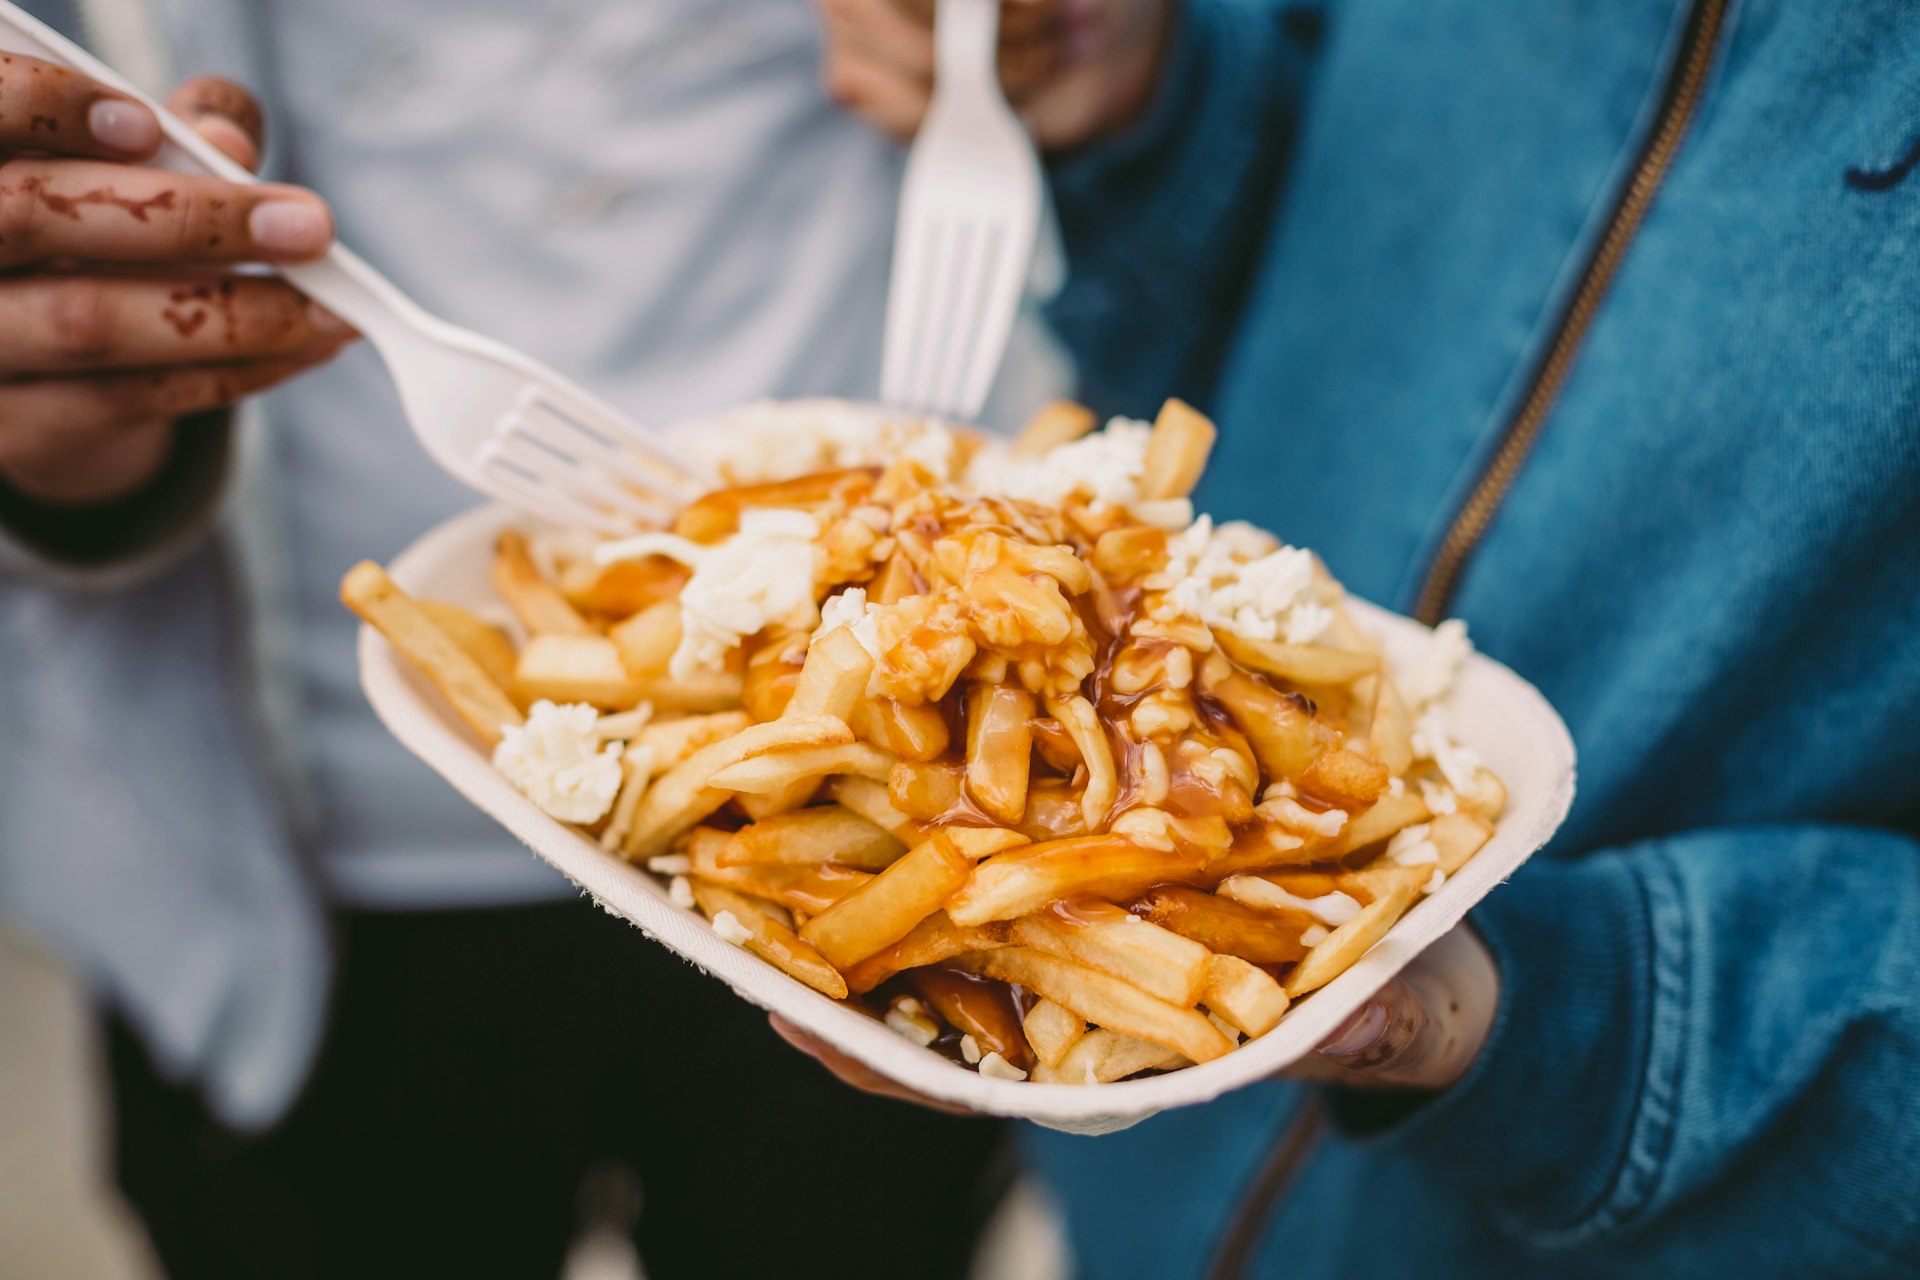 Muslim family eating poutine with forks in Canada